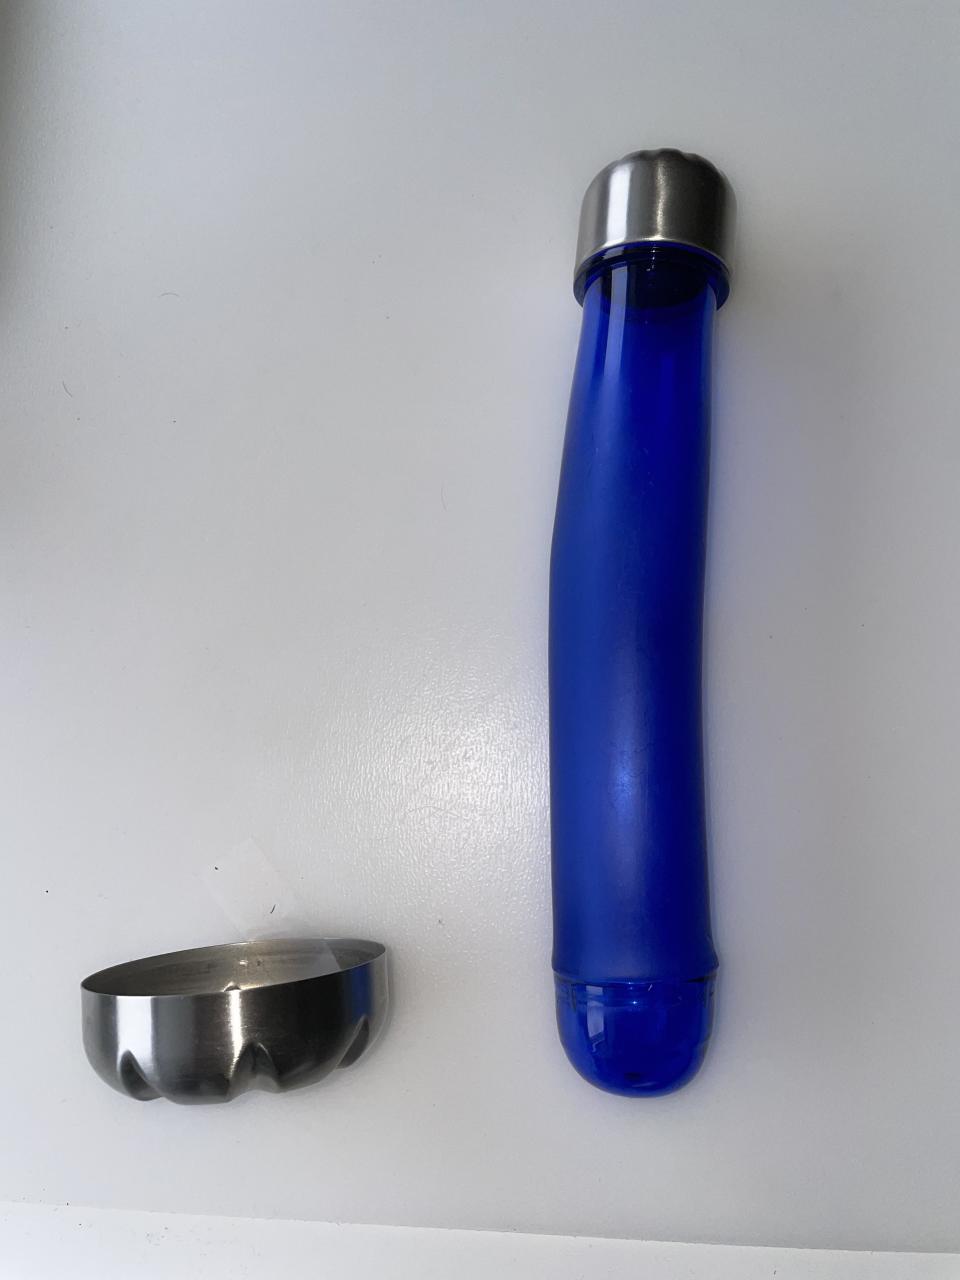 A blue tube with a metallic cap next to a separate silver-colored round lid, against a white background